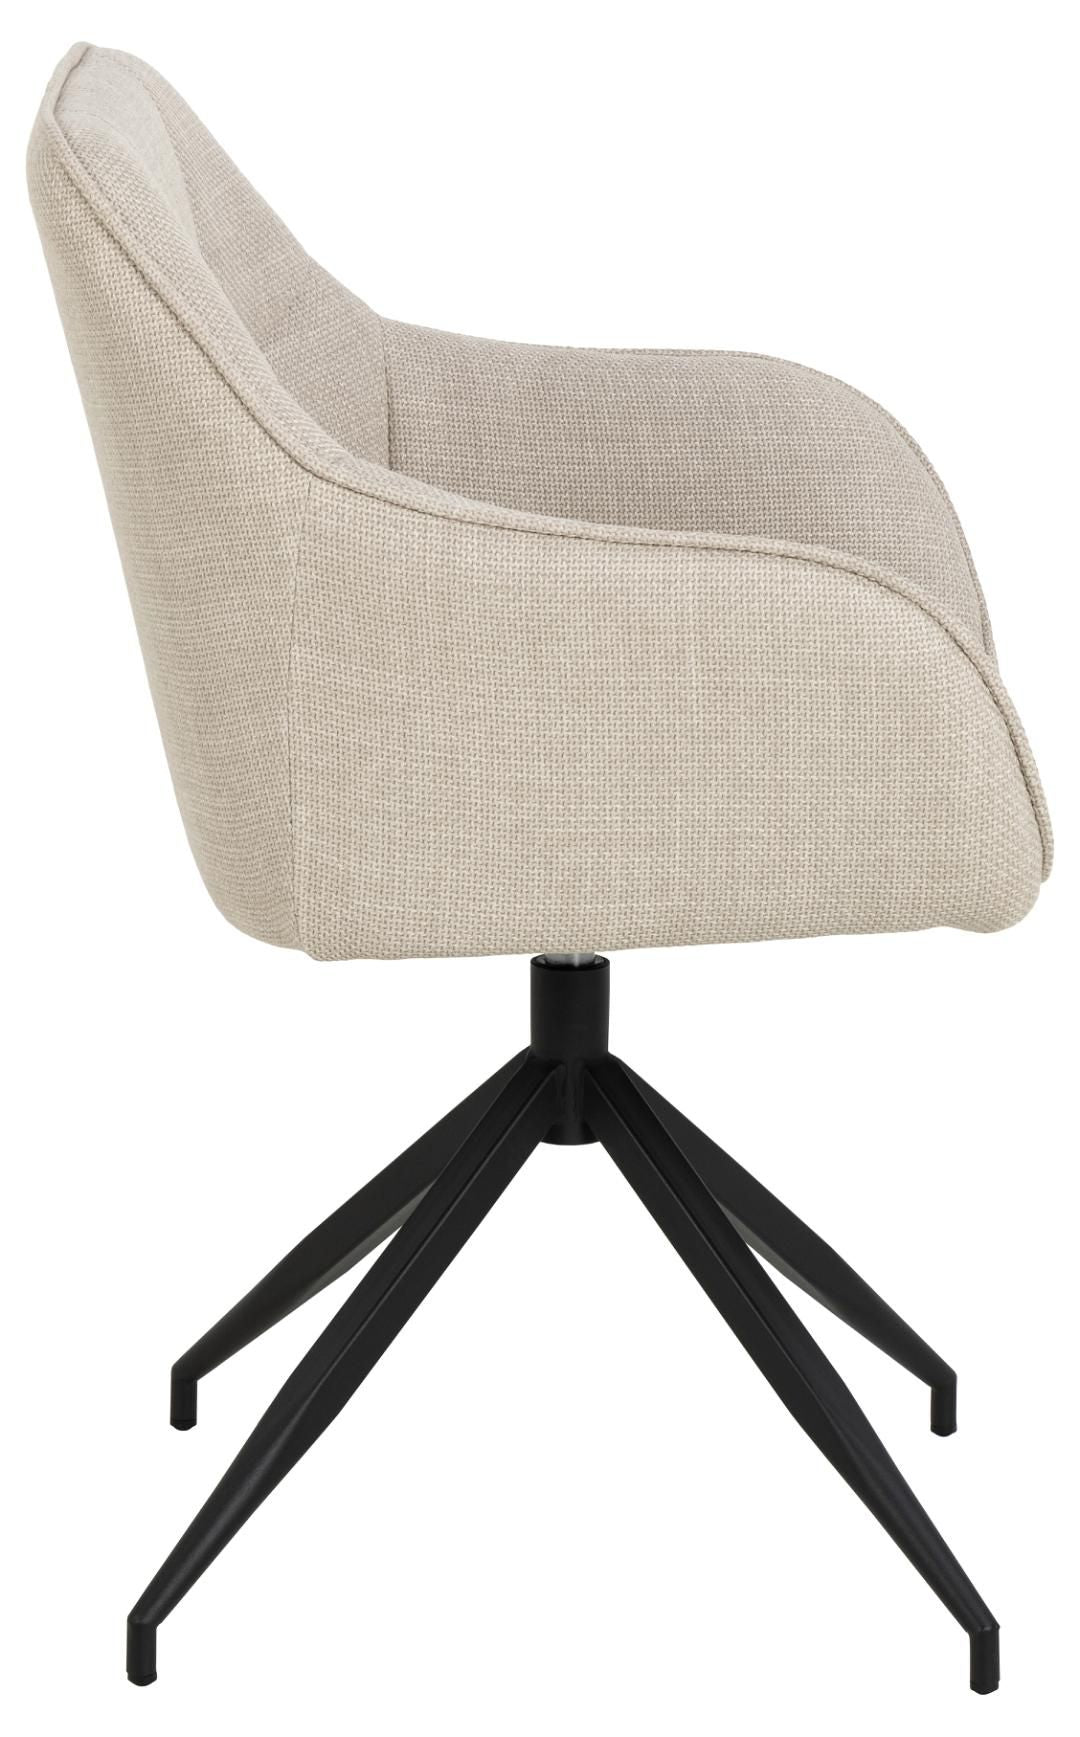 Brenda dining chair with armrest